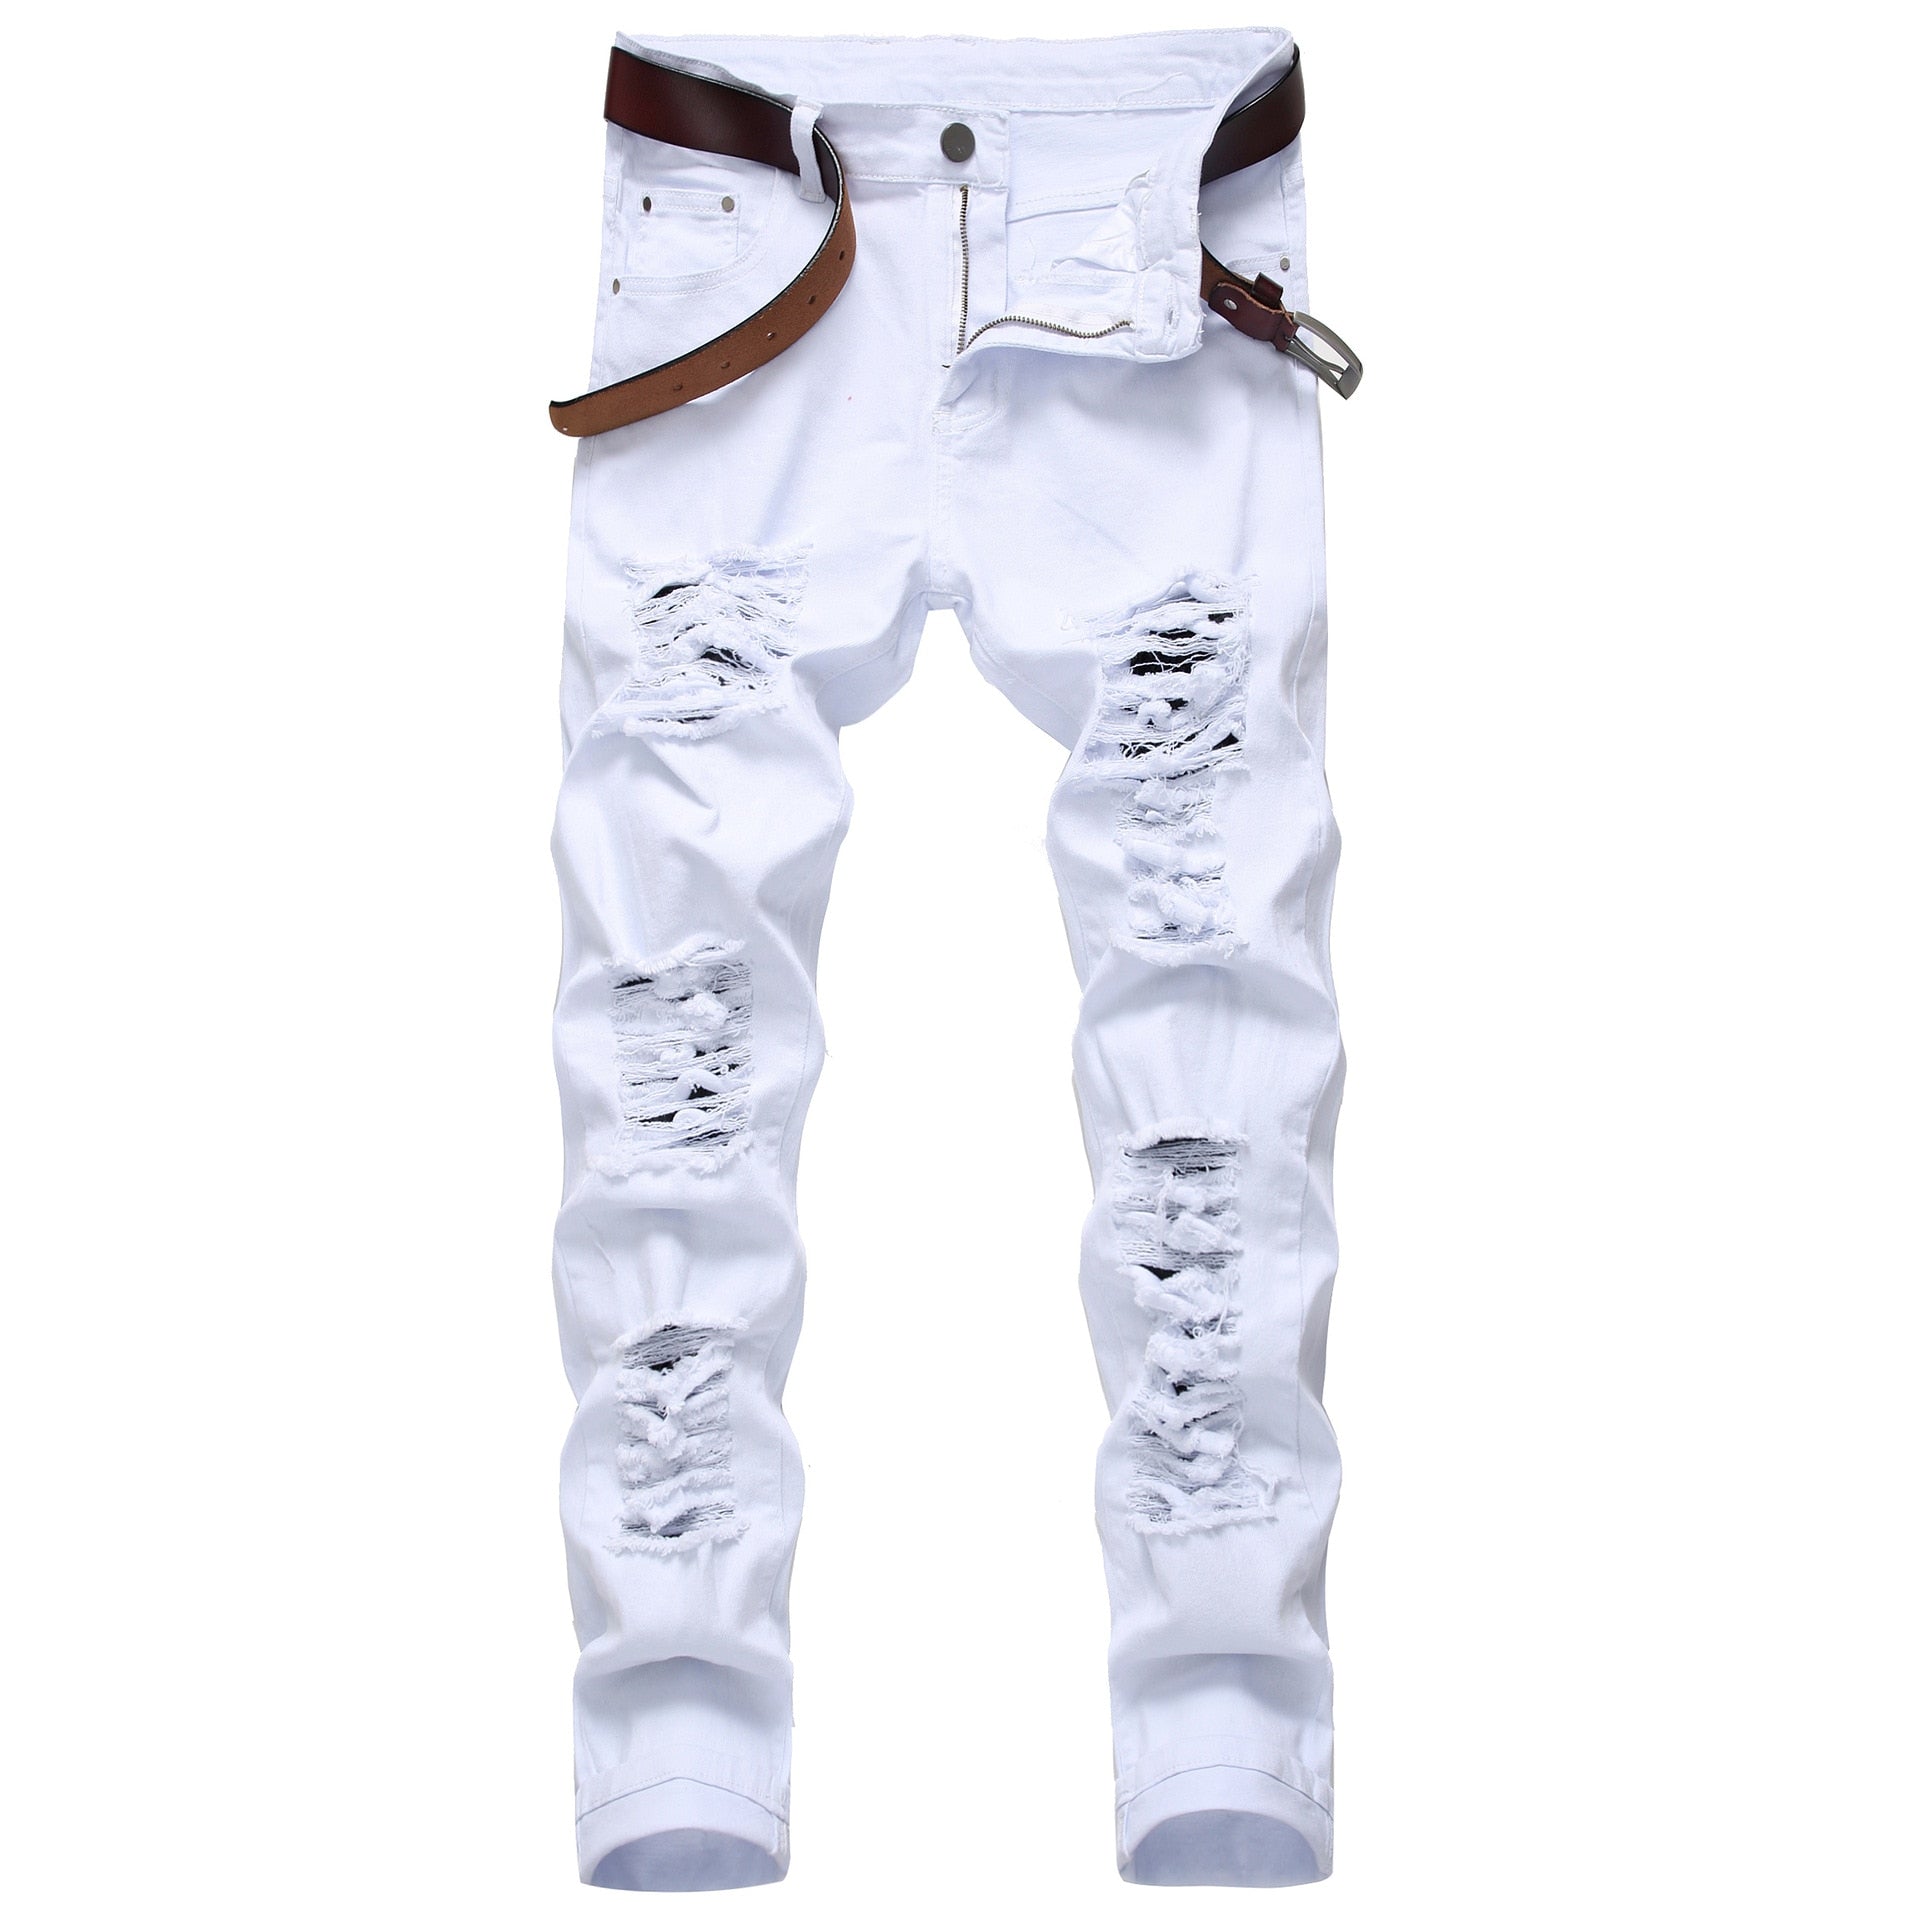 New Arrival Men Cotton Ripped Hole Jeans Casual Slim Skinny White Jeans